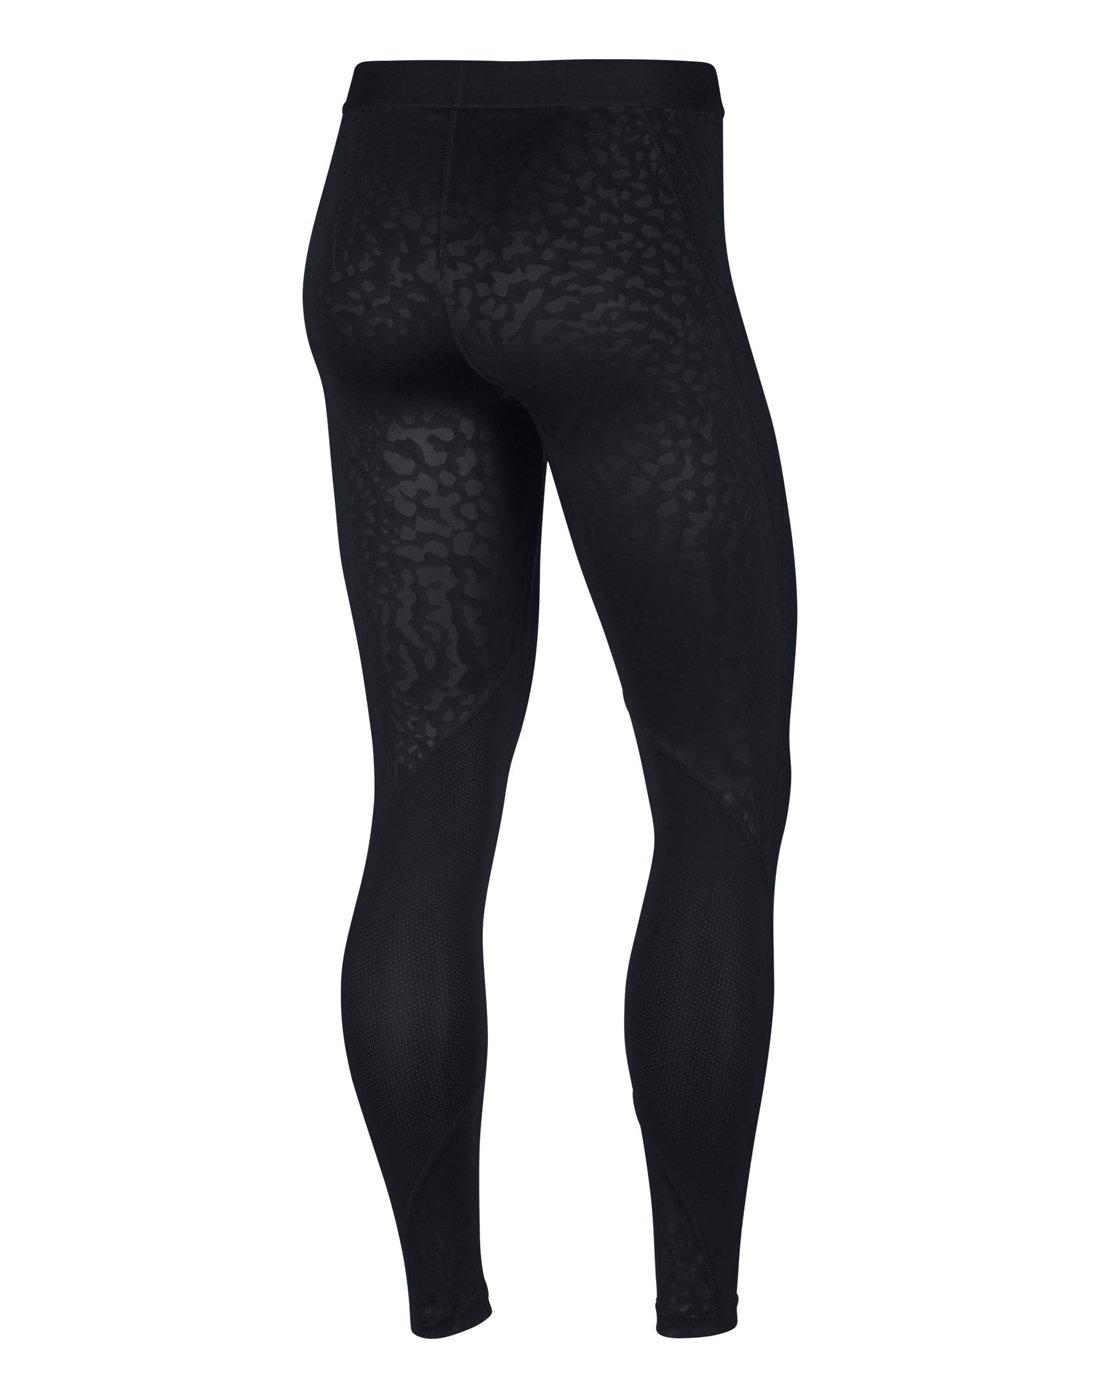 Nike Womens Spotted Cat Tight - Black | Life Style Sports IE